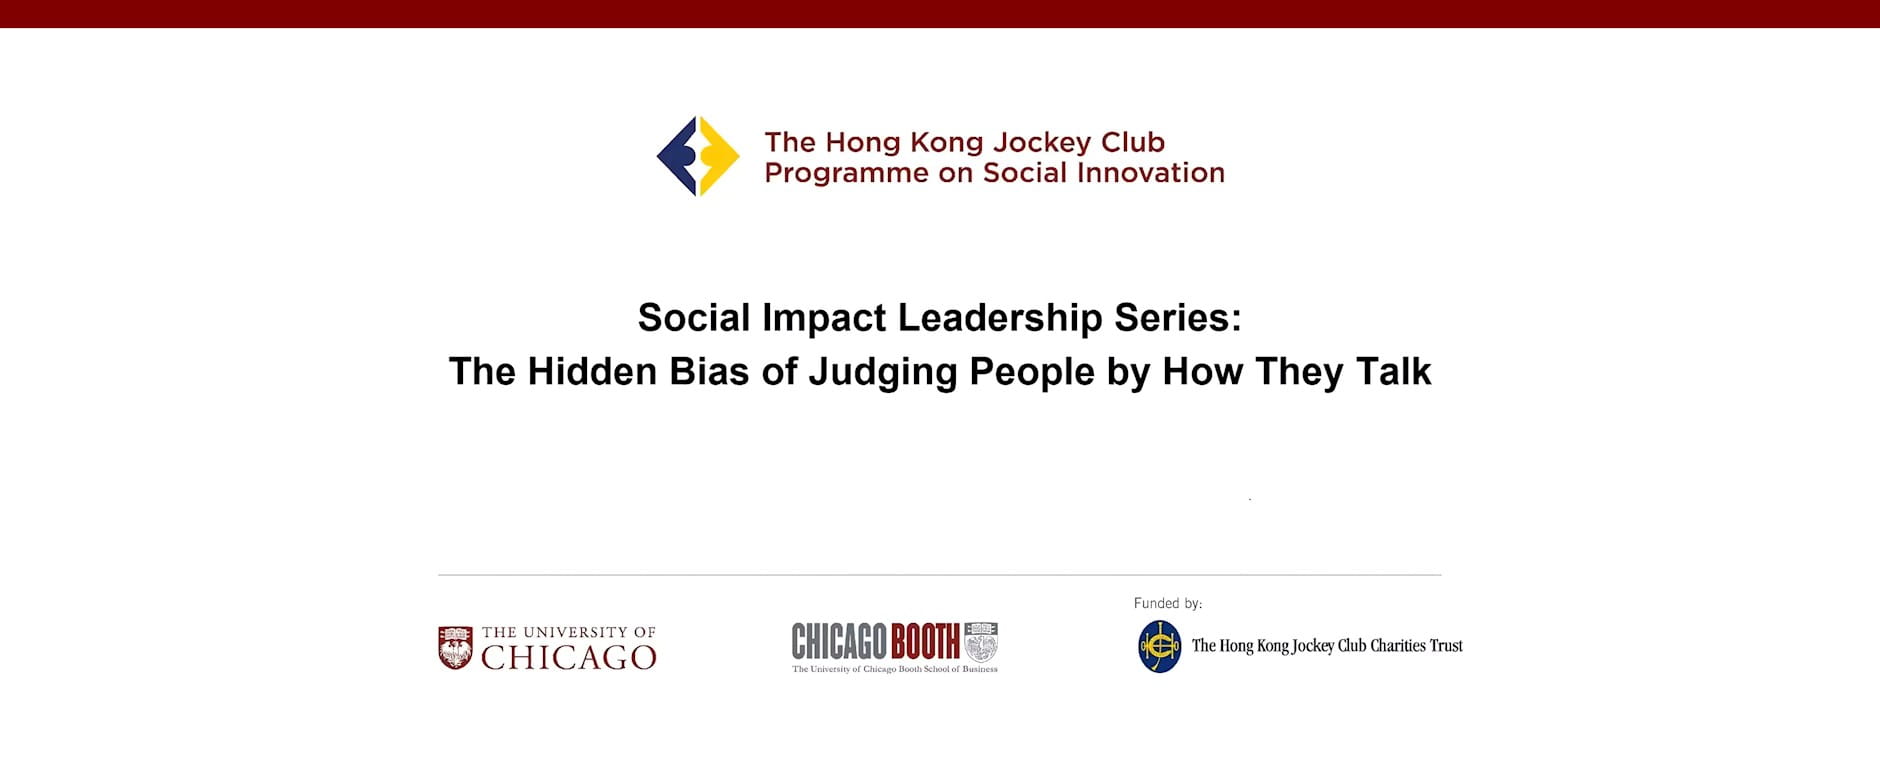 Social Impact Leadership Series: The Hidden Bias of Judging People by How They Talk